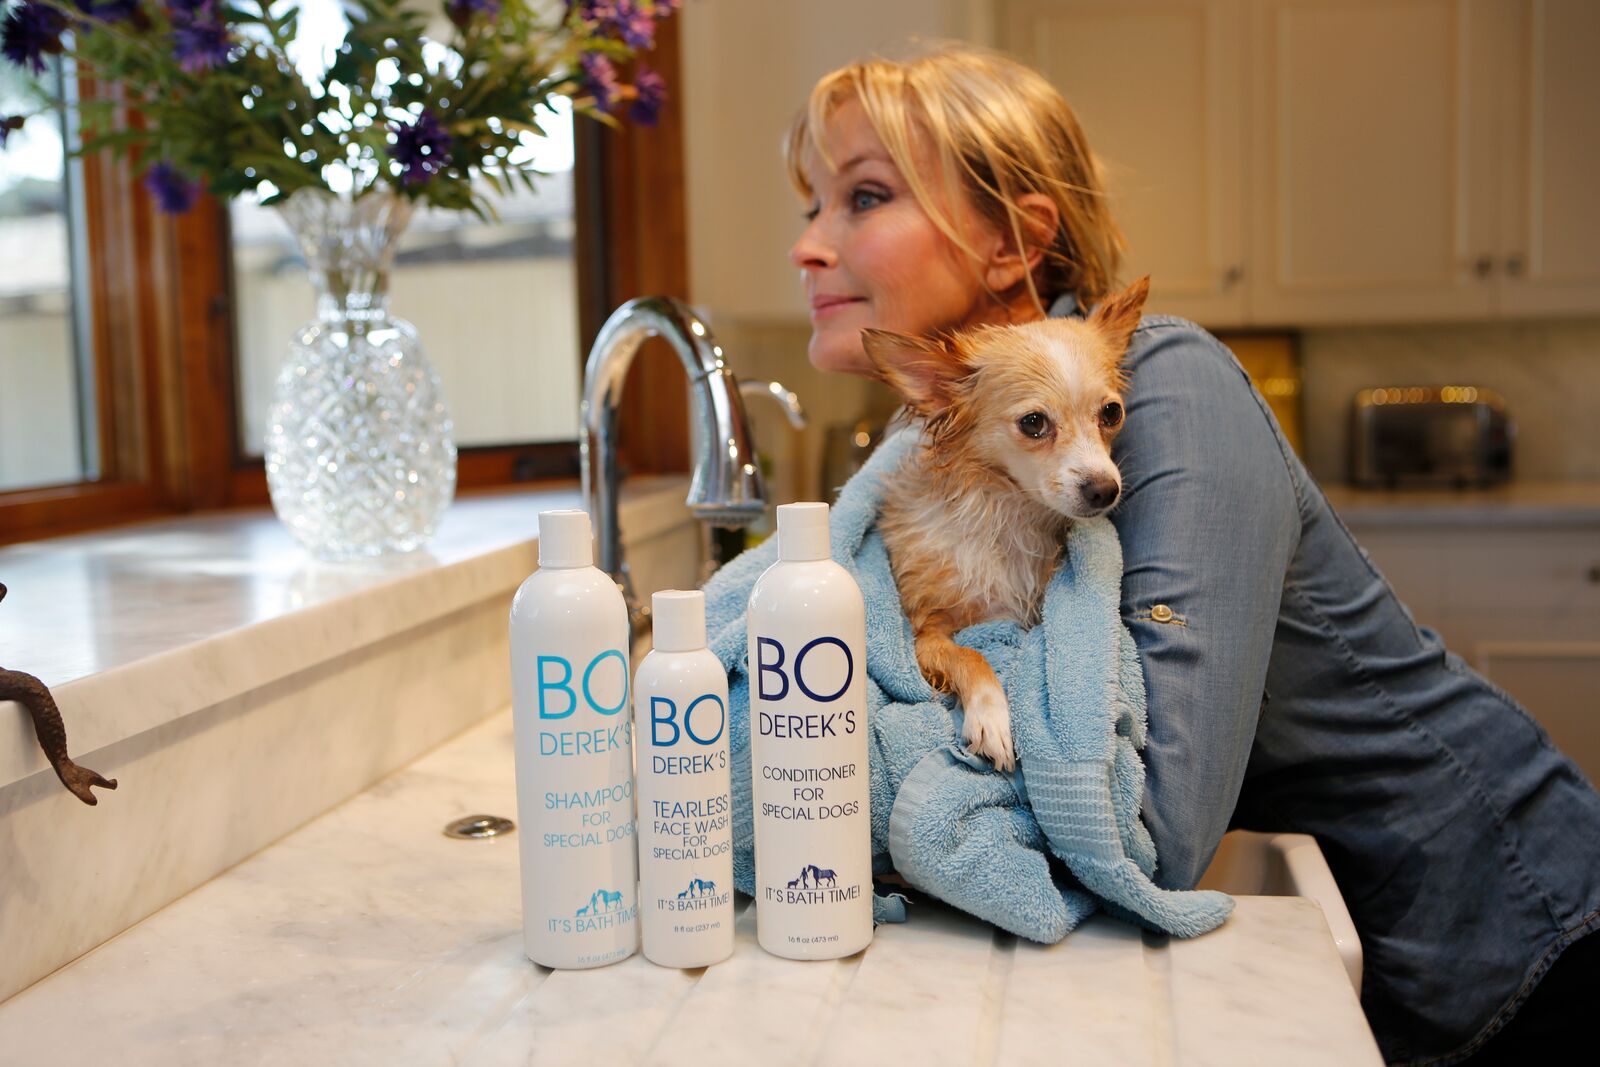 From iconic film to pet care, Bo Derek celebrates another success